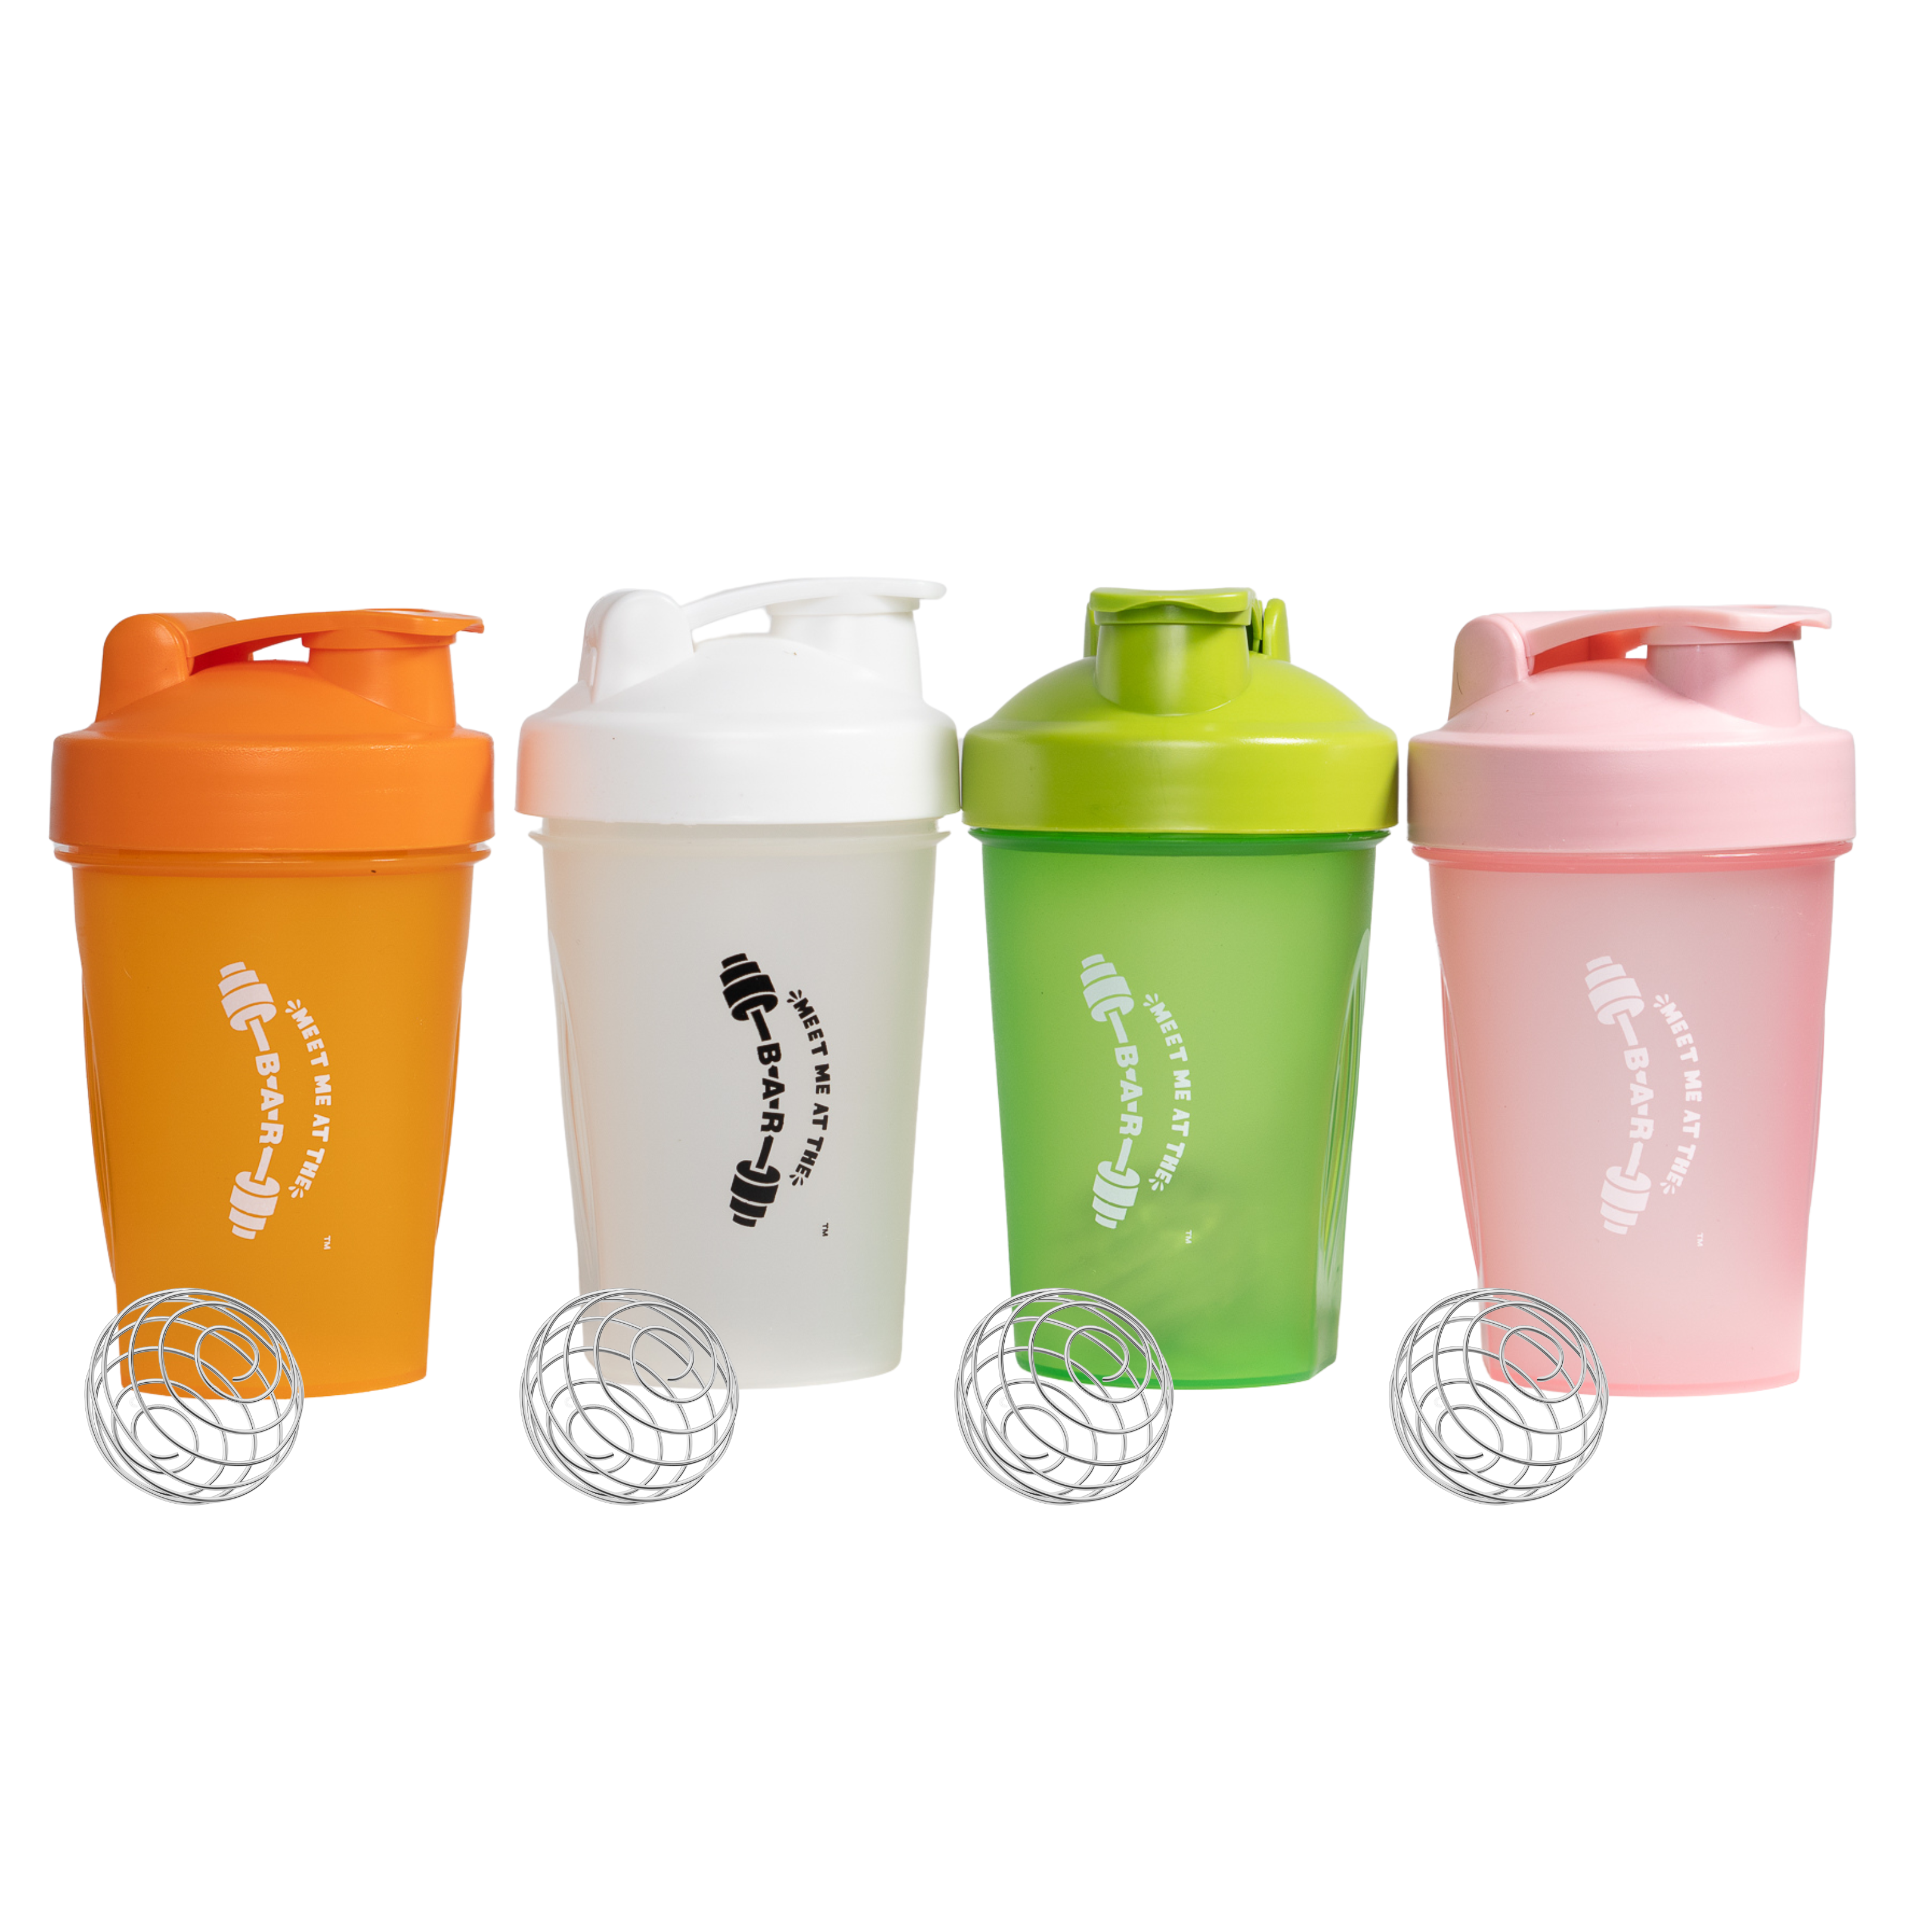 NutriFit Plus Sport Protein Blender Shaker Bottle12oz Multi Color BPA Free Leak Proof with an Innovative Stainless Mixer